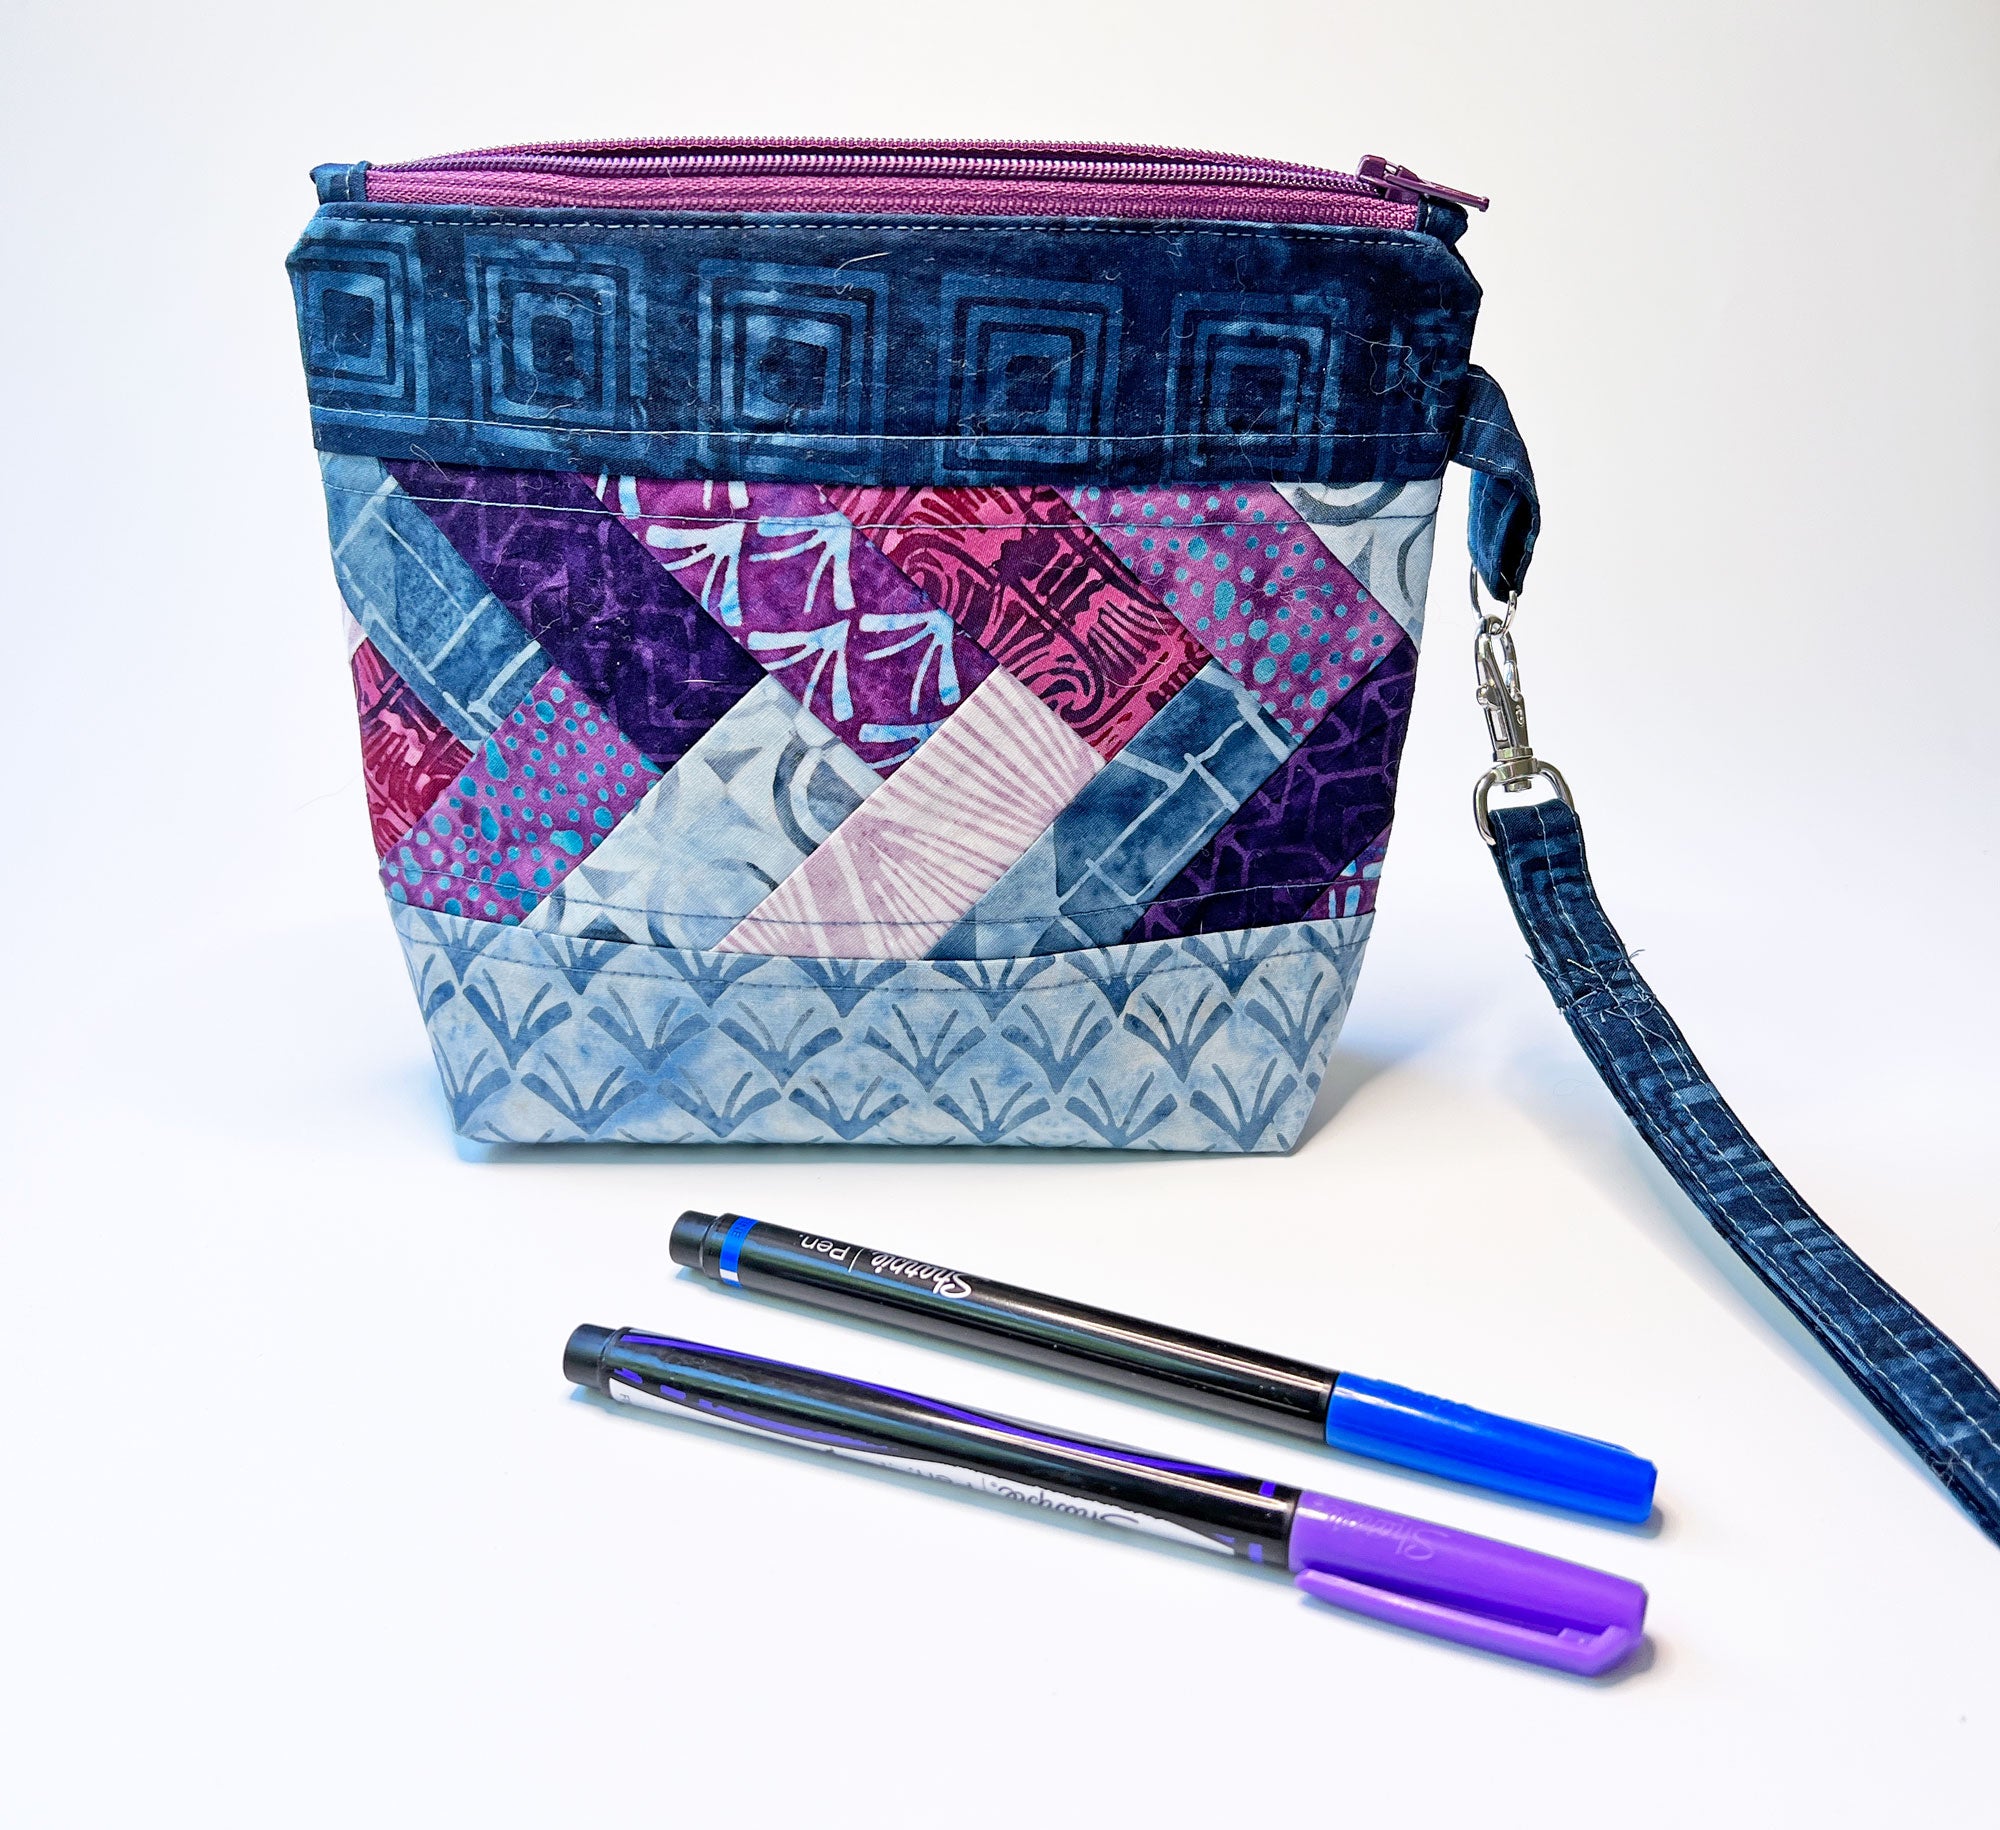 Small Pack it Up! bag is a Grab and Go zippered pouch perfect for stowing small essentials!